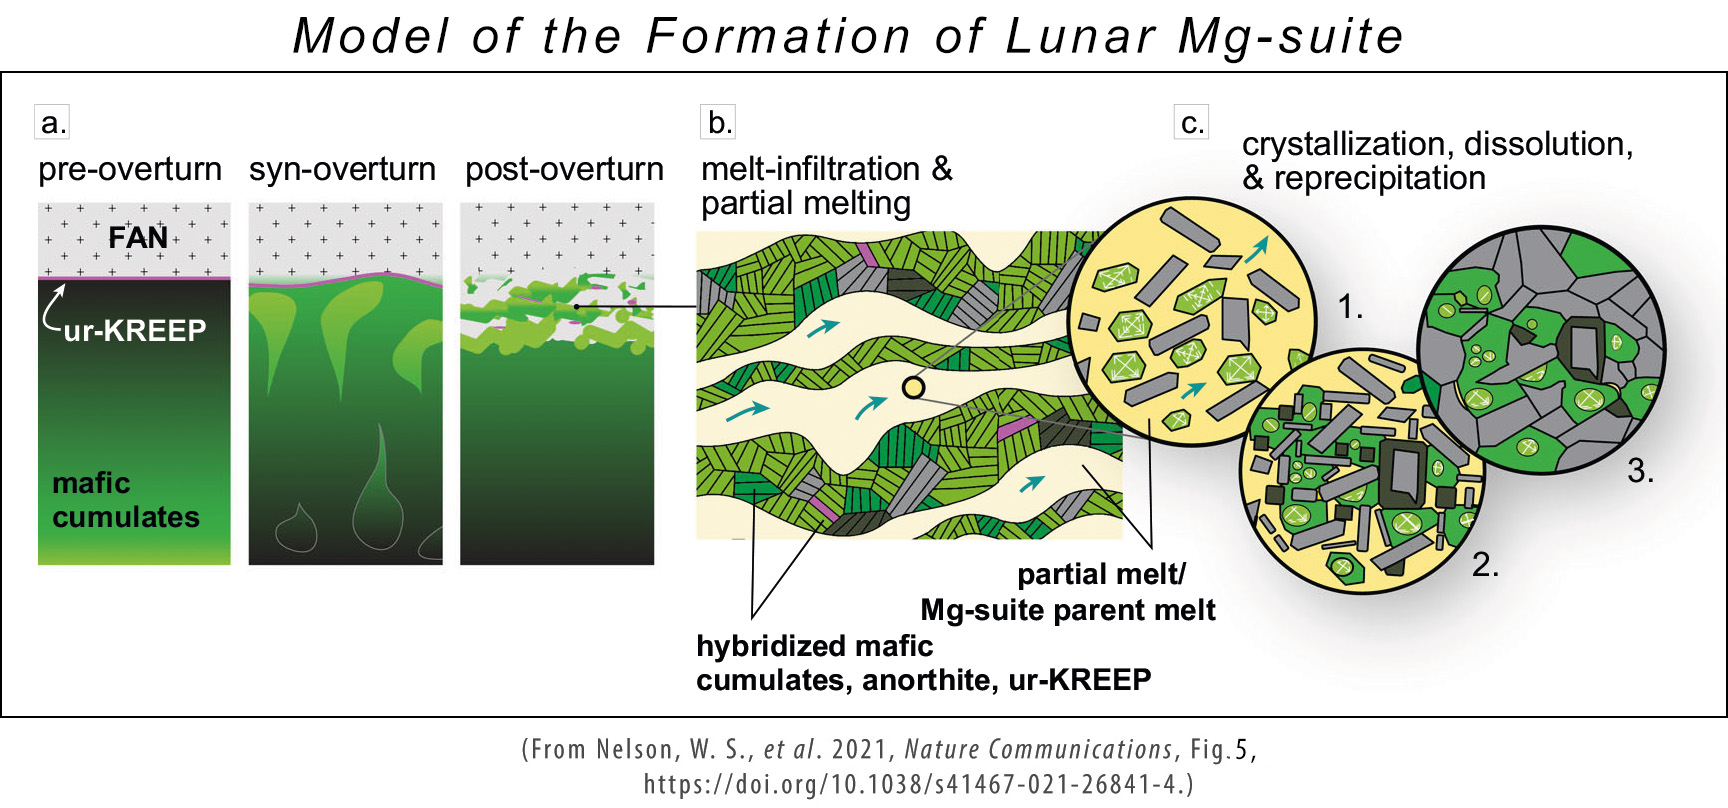 Three-part illustration of the model by Nelson and colleagues for the formation of lunar Mg-suite.